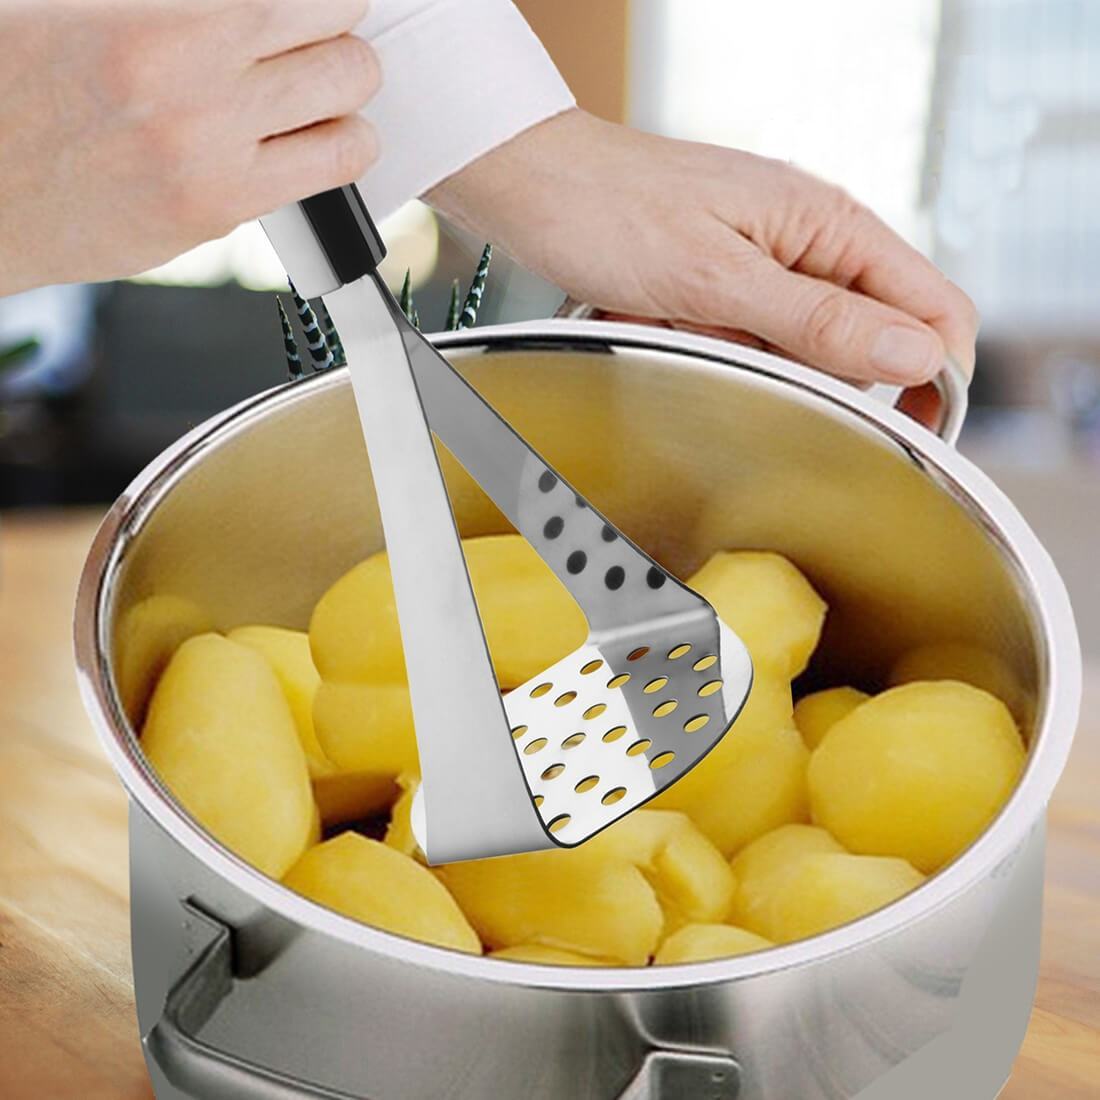 Benefits of Using a Stainless Steel Masher